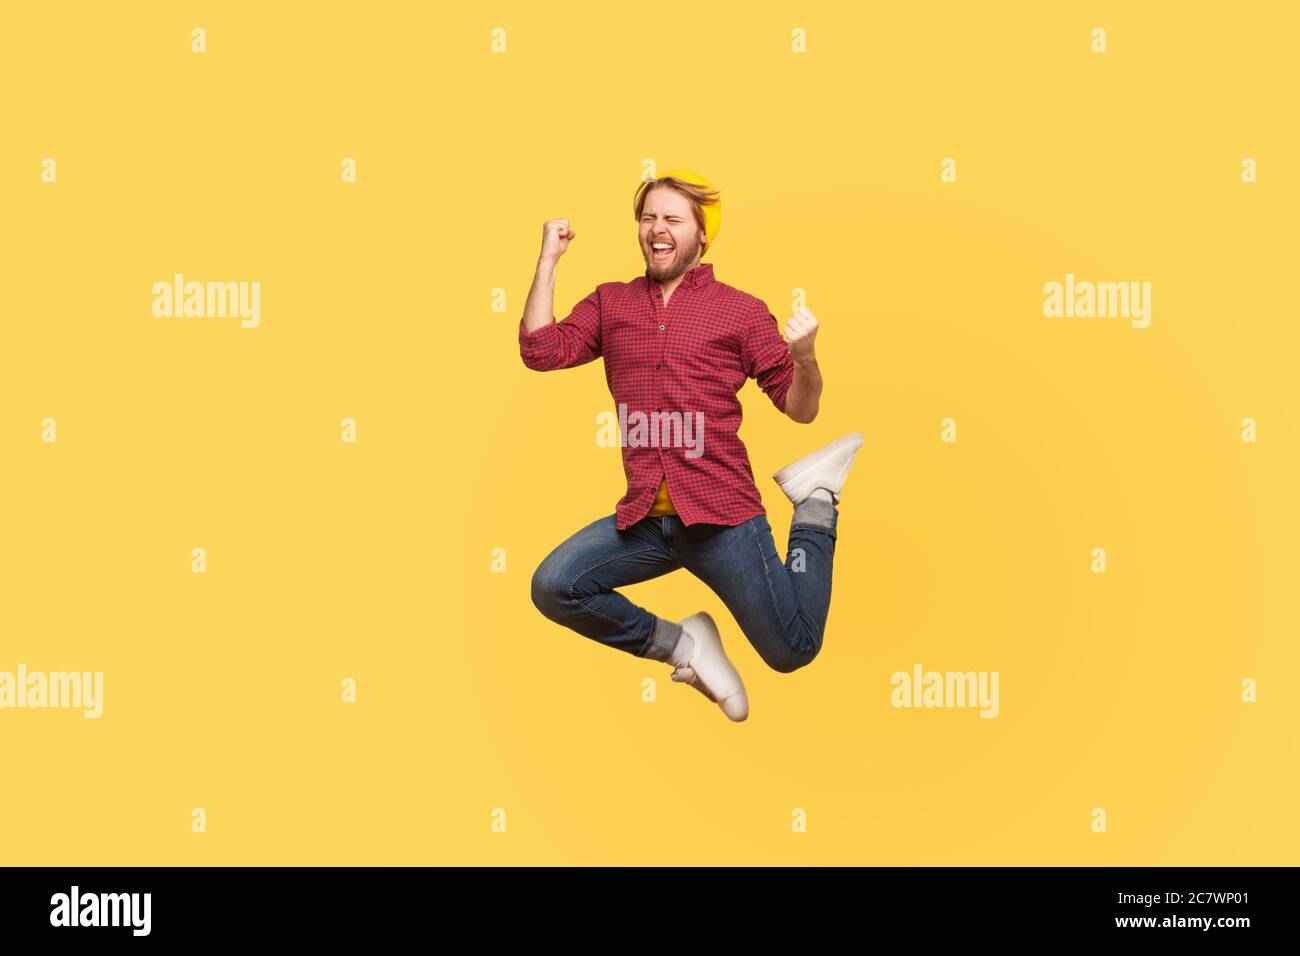 Enthusiastic delighted victorious guy jumping high trampoline, flying in air shouting for joy, crazy about success, triumphal winning. Life people ene Stock Photo